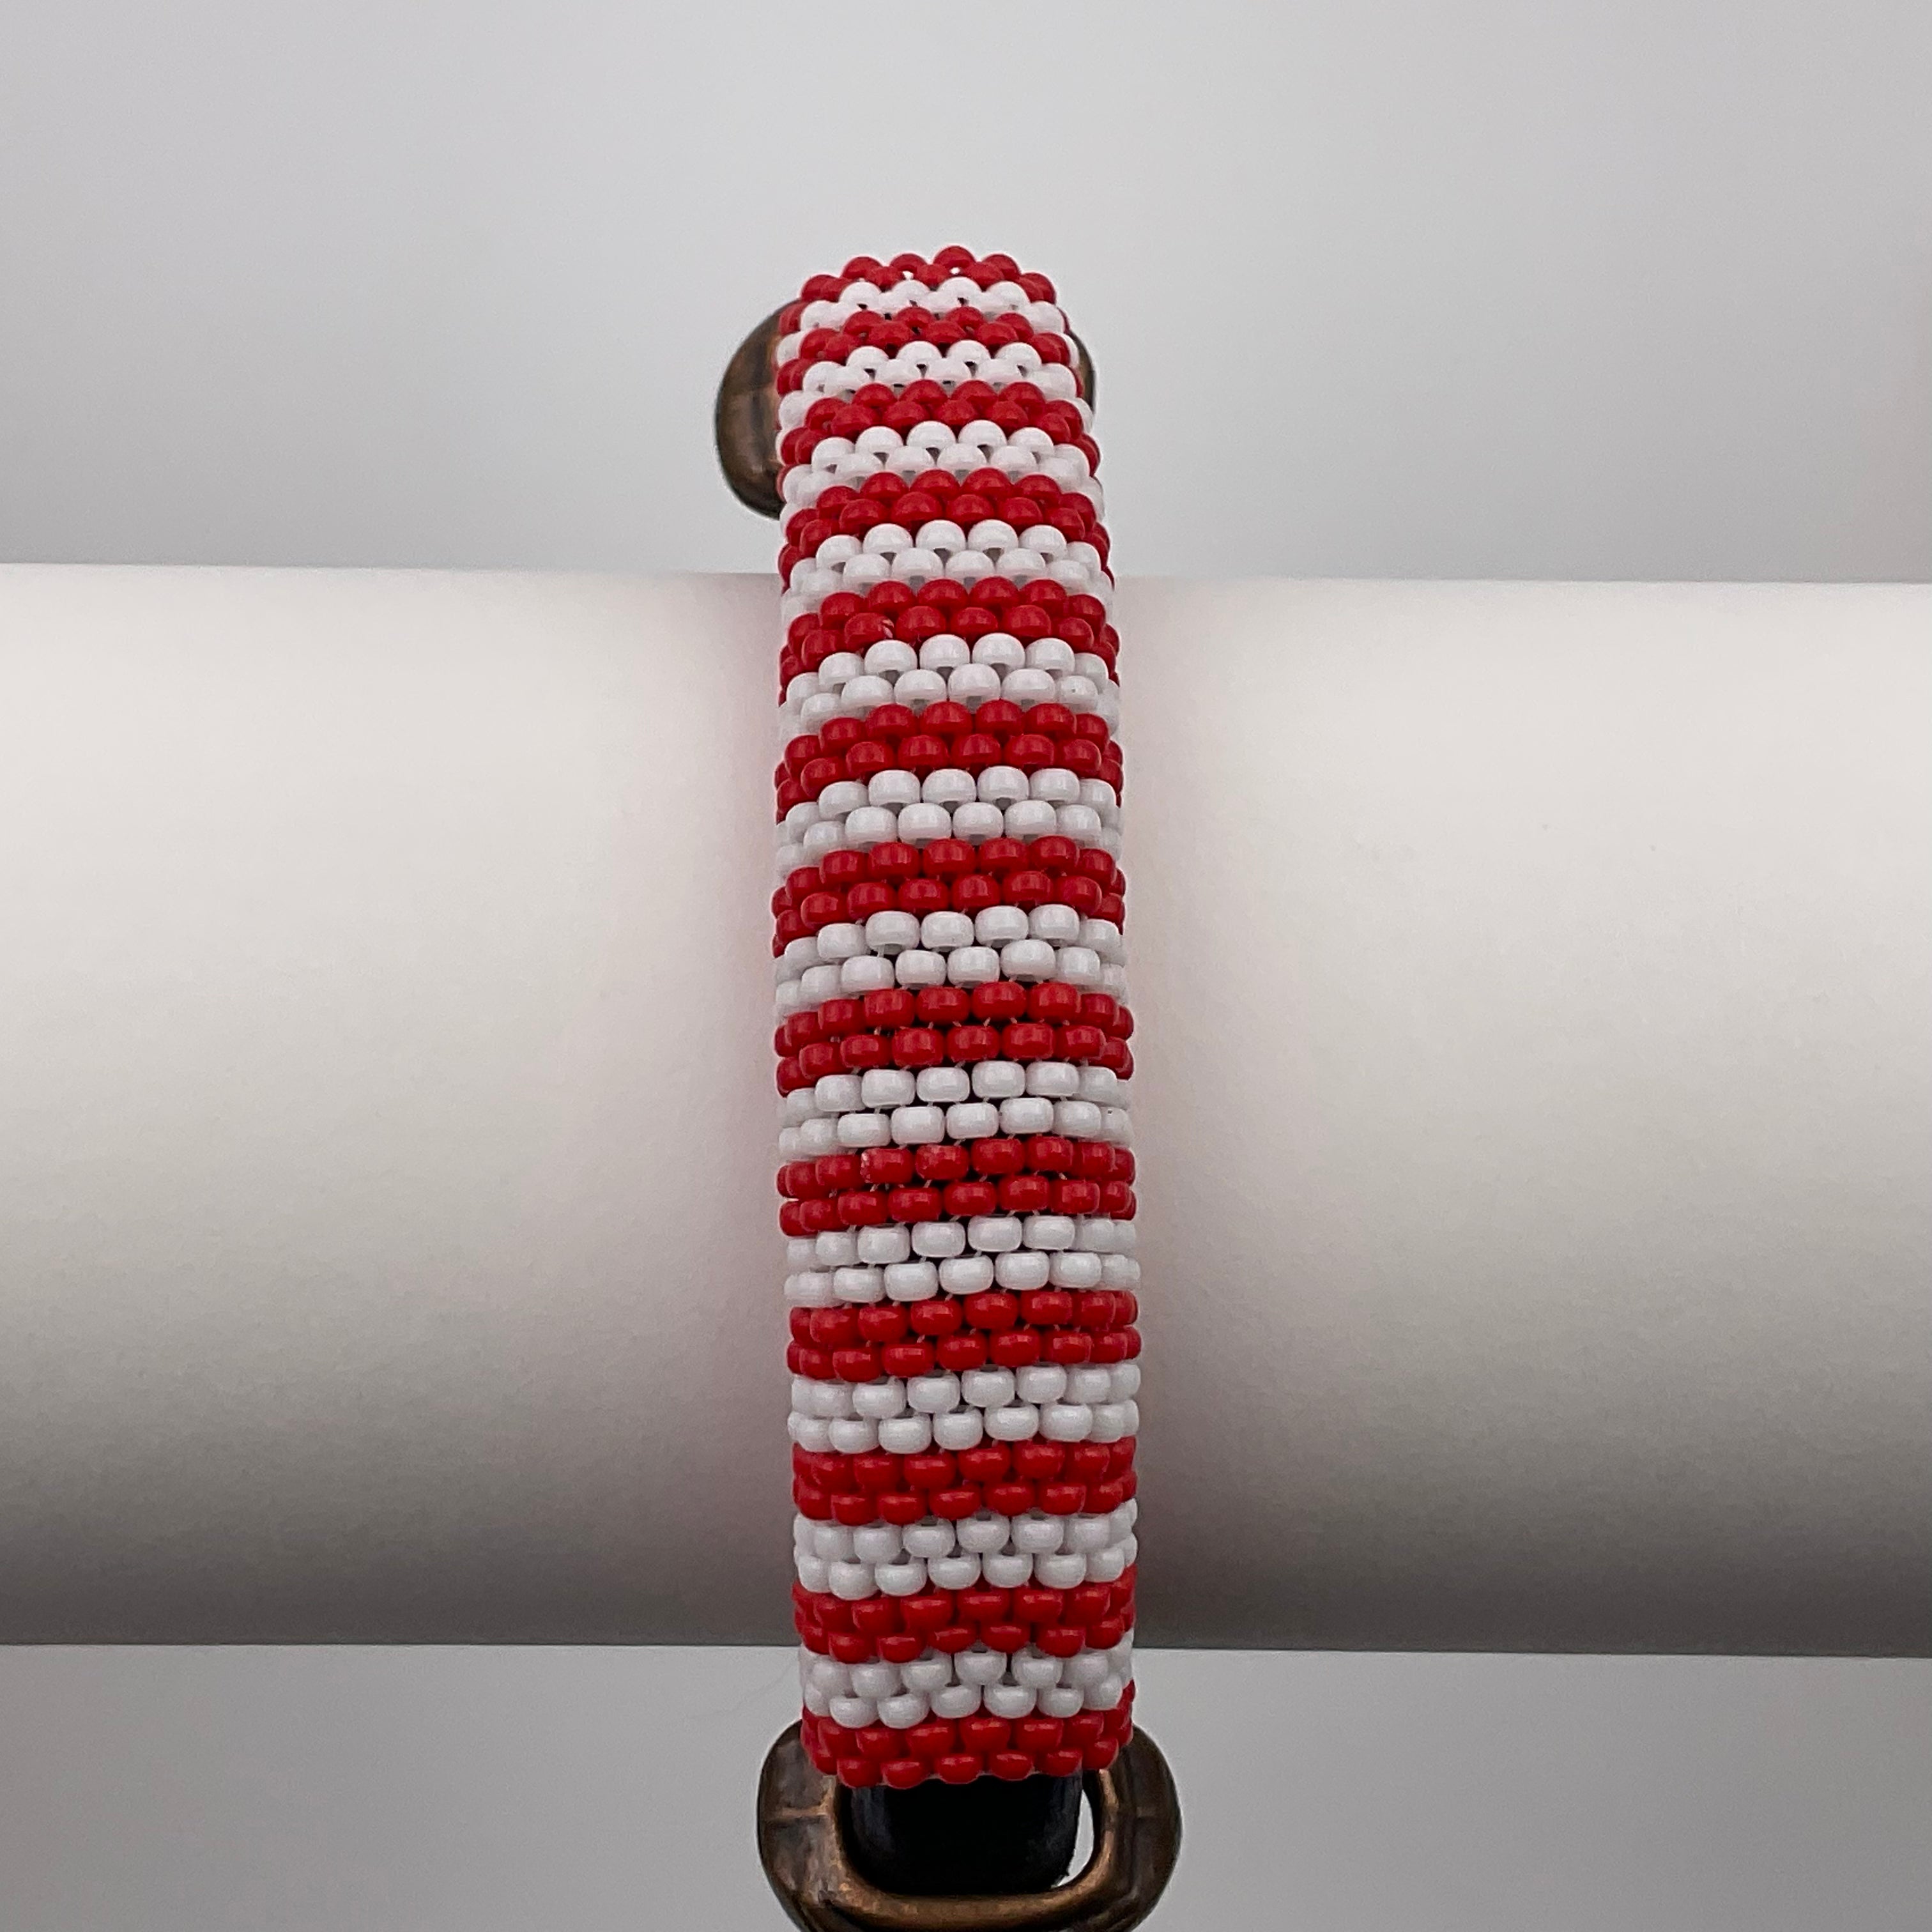 Red White and Blue Leather Bracelet